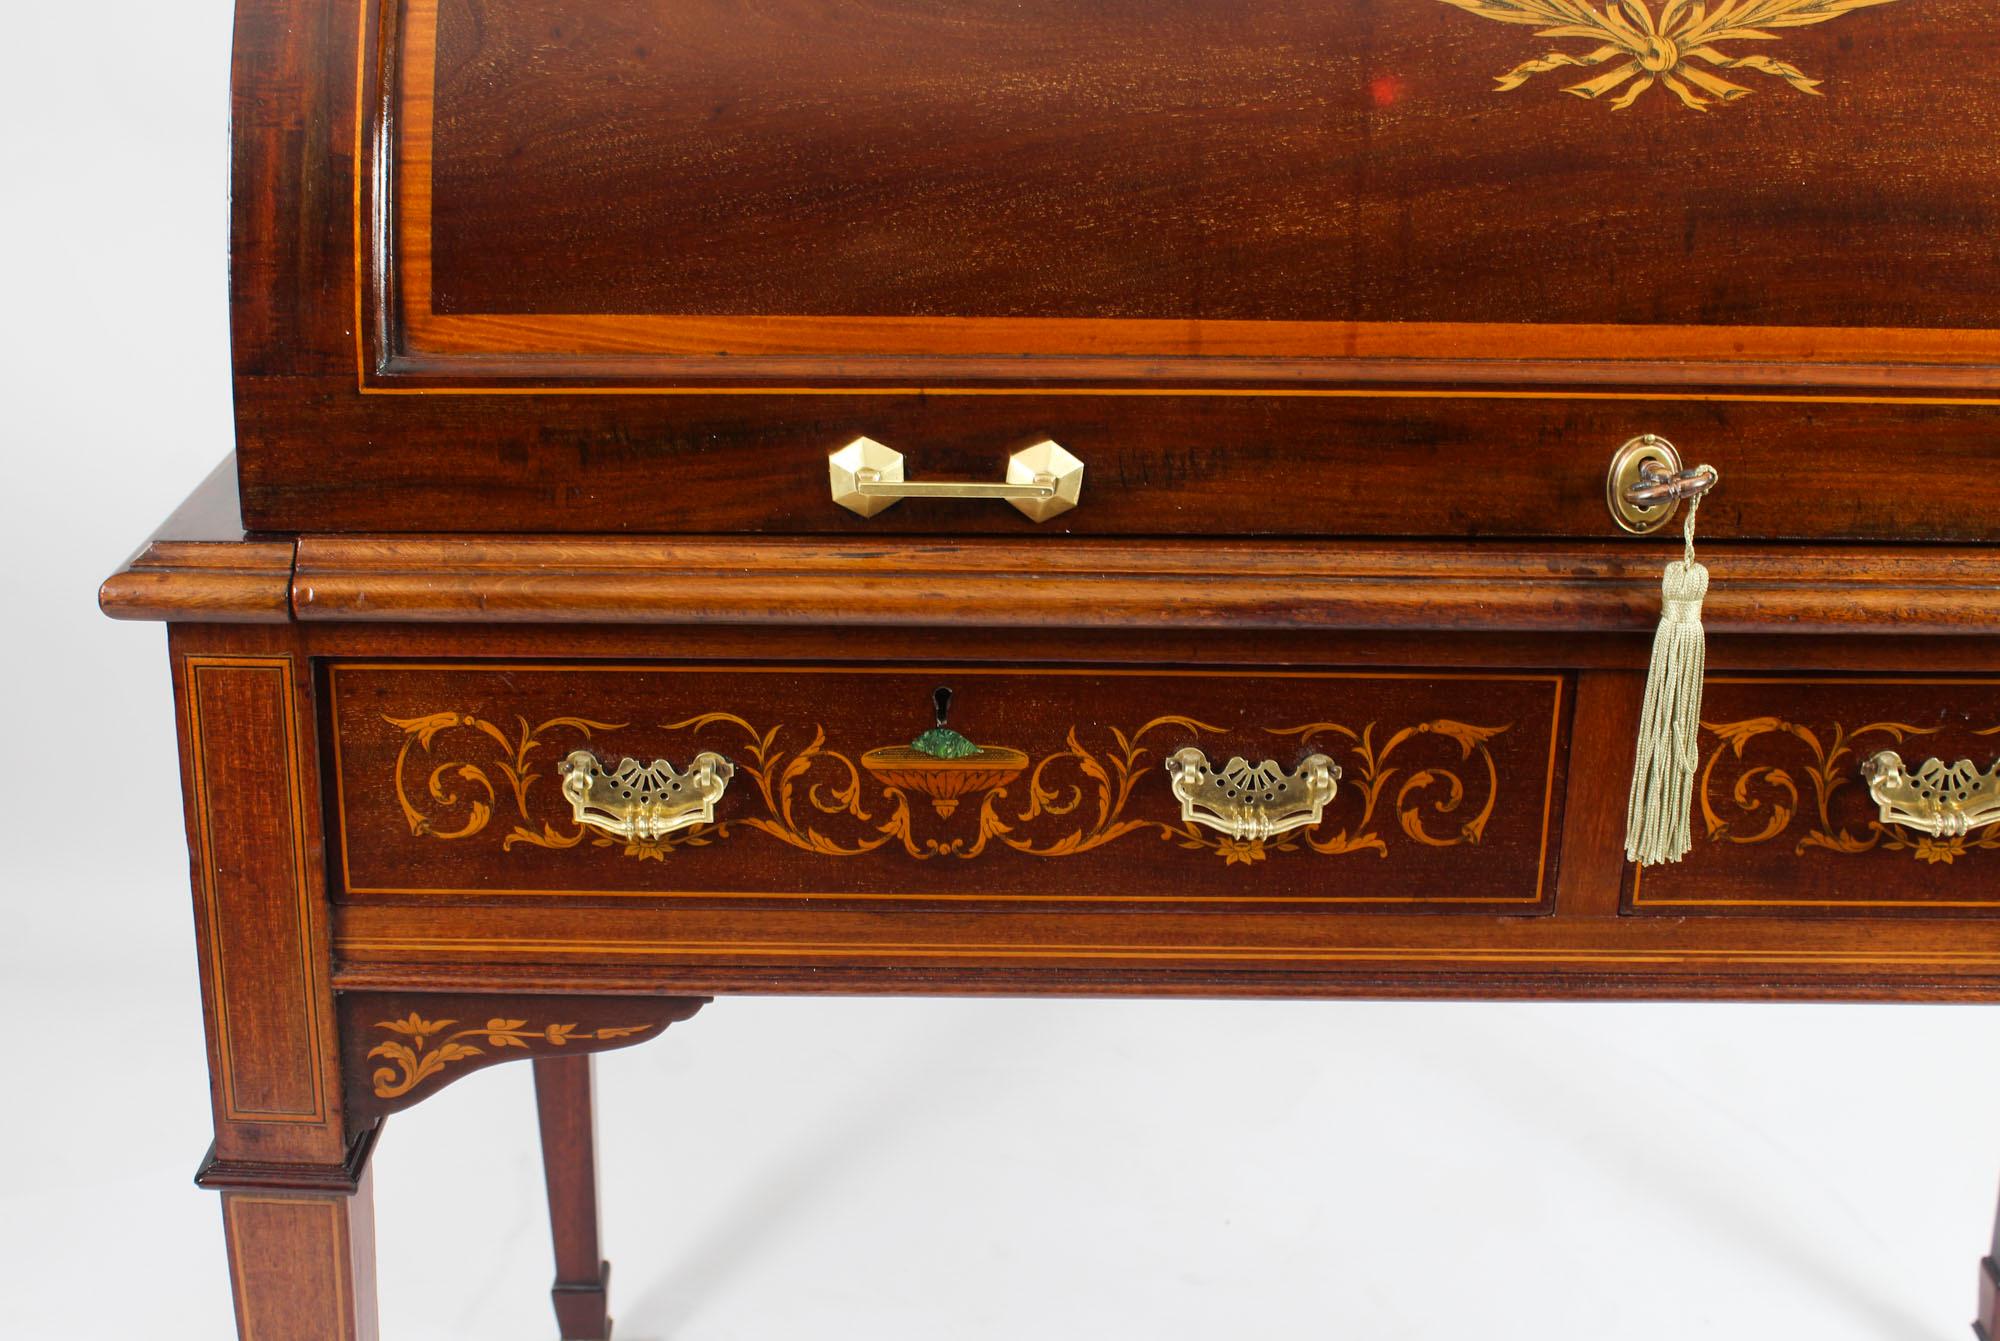 Marquetry Antique Flame Mahogany and Inlaid Cylinder Bureau Desk Shoolbred 19th Century